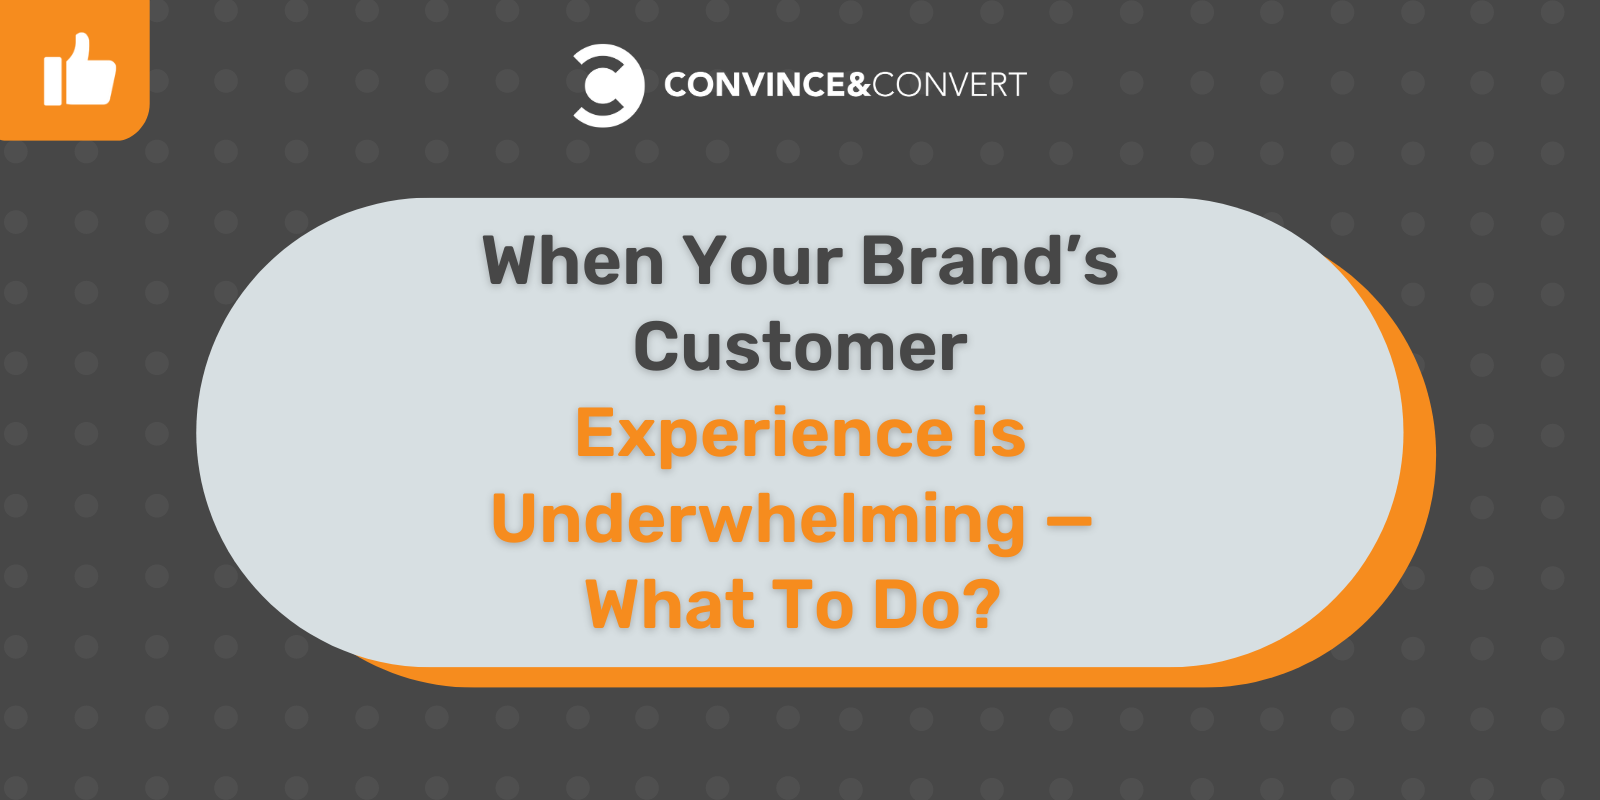 When Your Brand’s Customer Experience is Underwhelming — What To Do